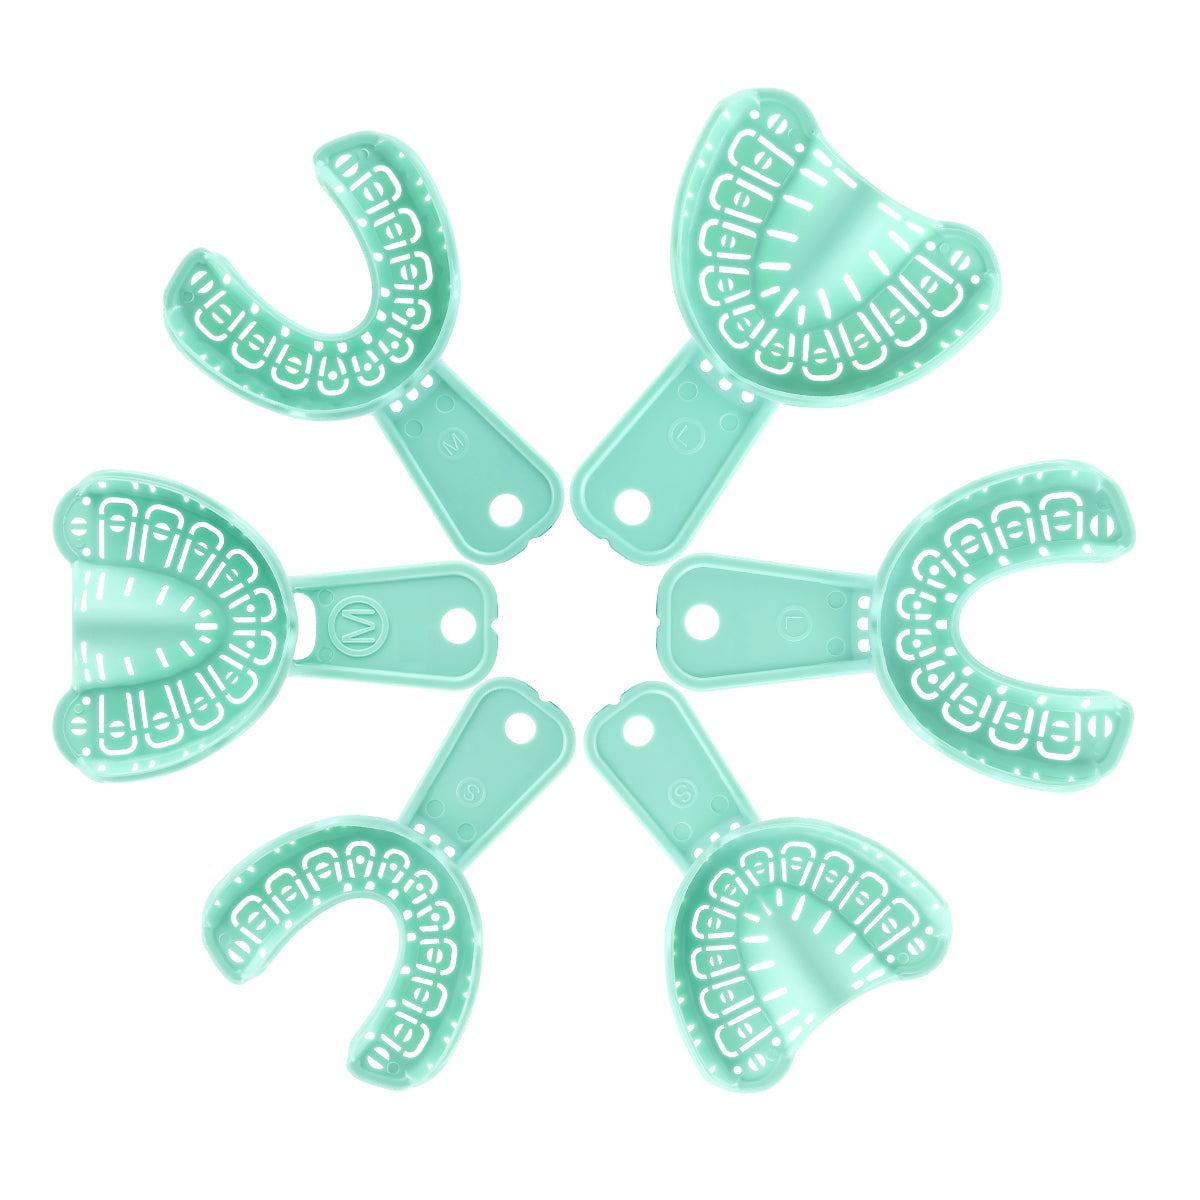 6pcs Dental Impression Trays Full Mouth For Teeth Mold Tray S/M/L Green Color - pairaydental.com